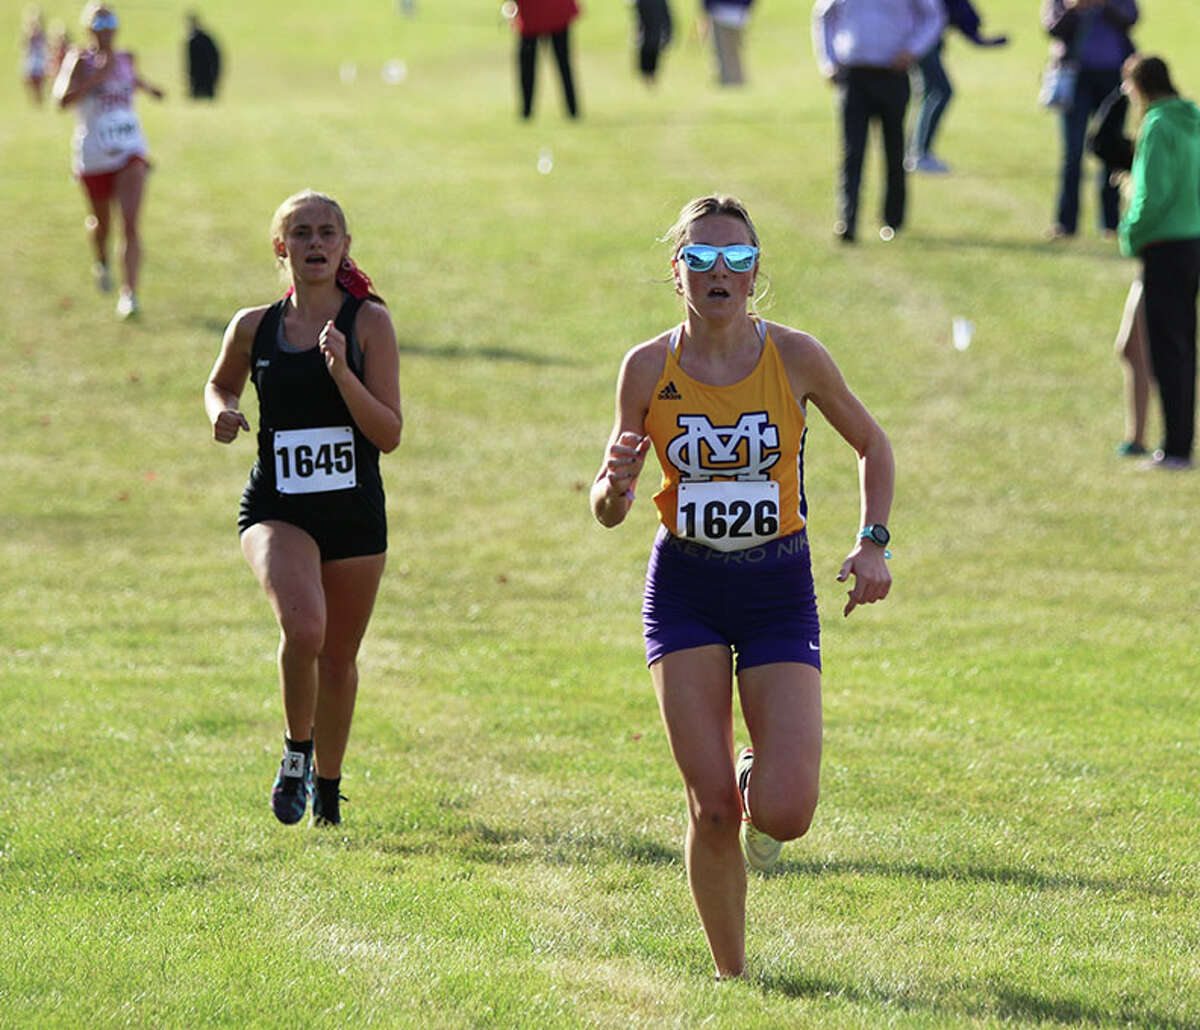 CM's Alyssa Mann (right) nears the finish line ahead of Highland's Maddie Dortch in the MVC Meet on Thursday at Principia College in Elsah. Both runners earned All-MVC honors with a top-15 finish.